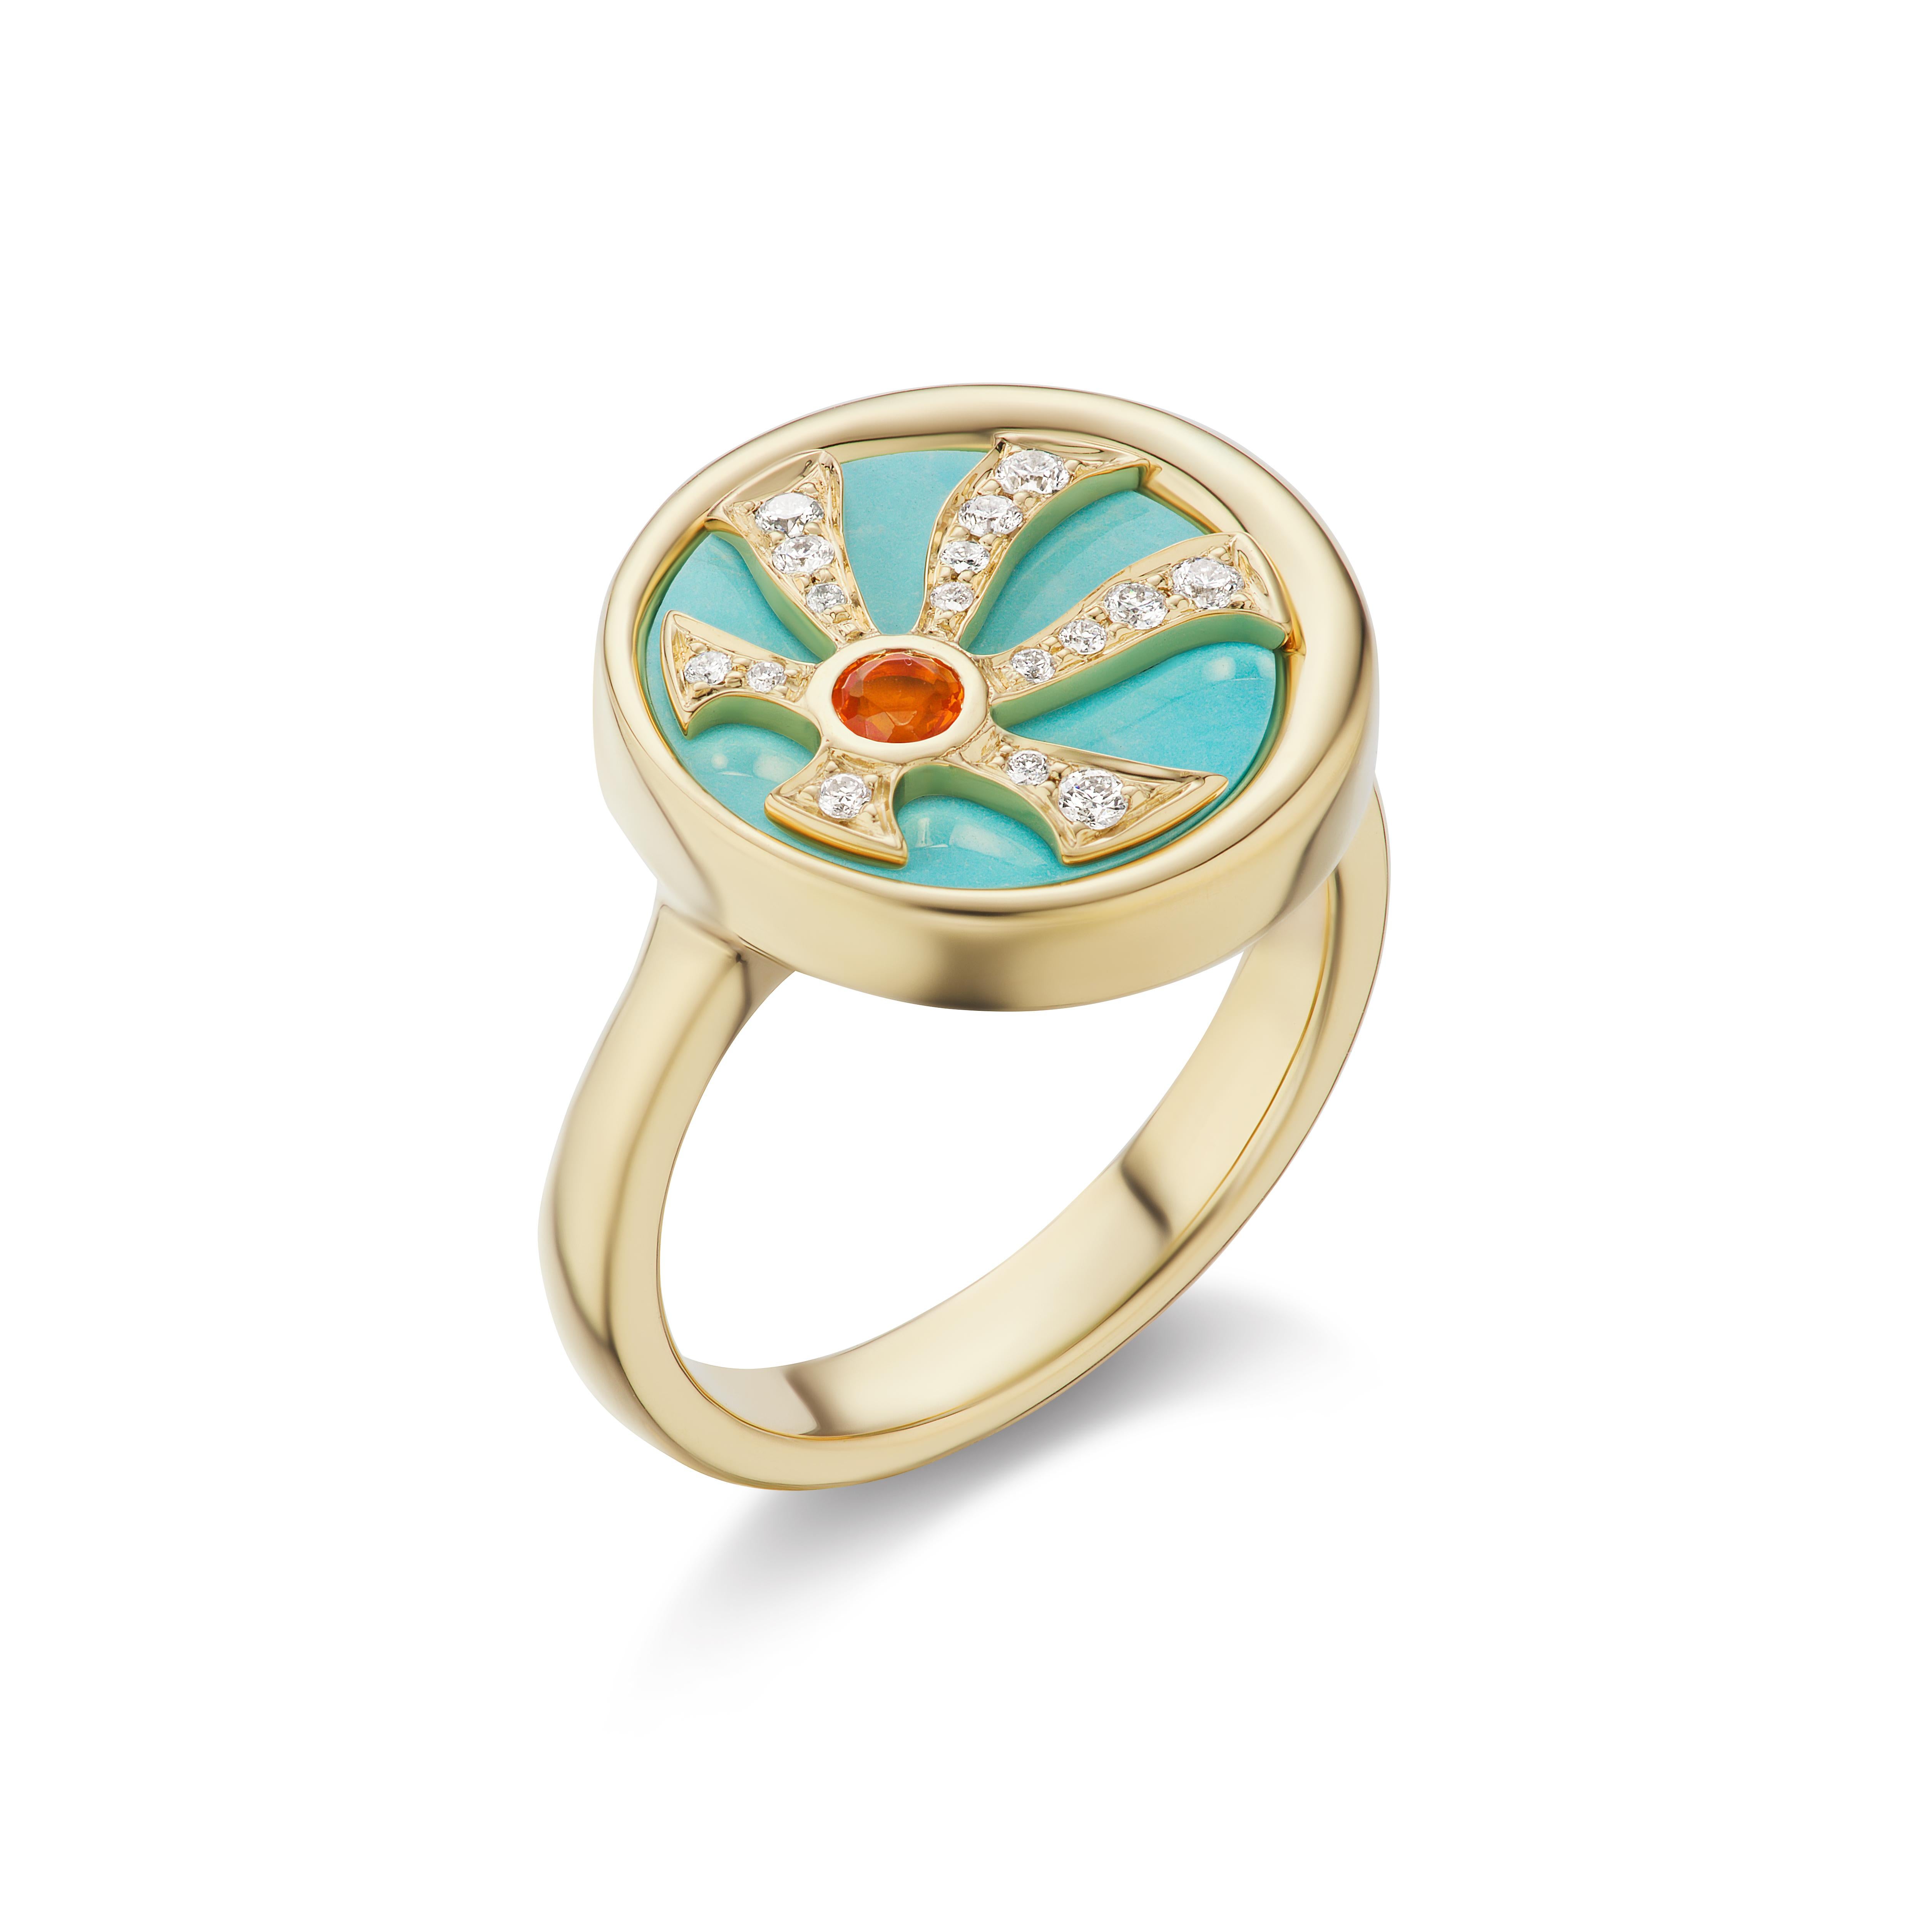 The Four Elements Fire Ring illustrates the creative nature that ignites our passions through its bold imagery. A fire opal center emblazoned in the rising sun is surrounded by magnificent rays playfully sparkling with diamonds against a turquoise